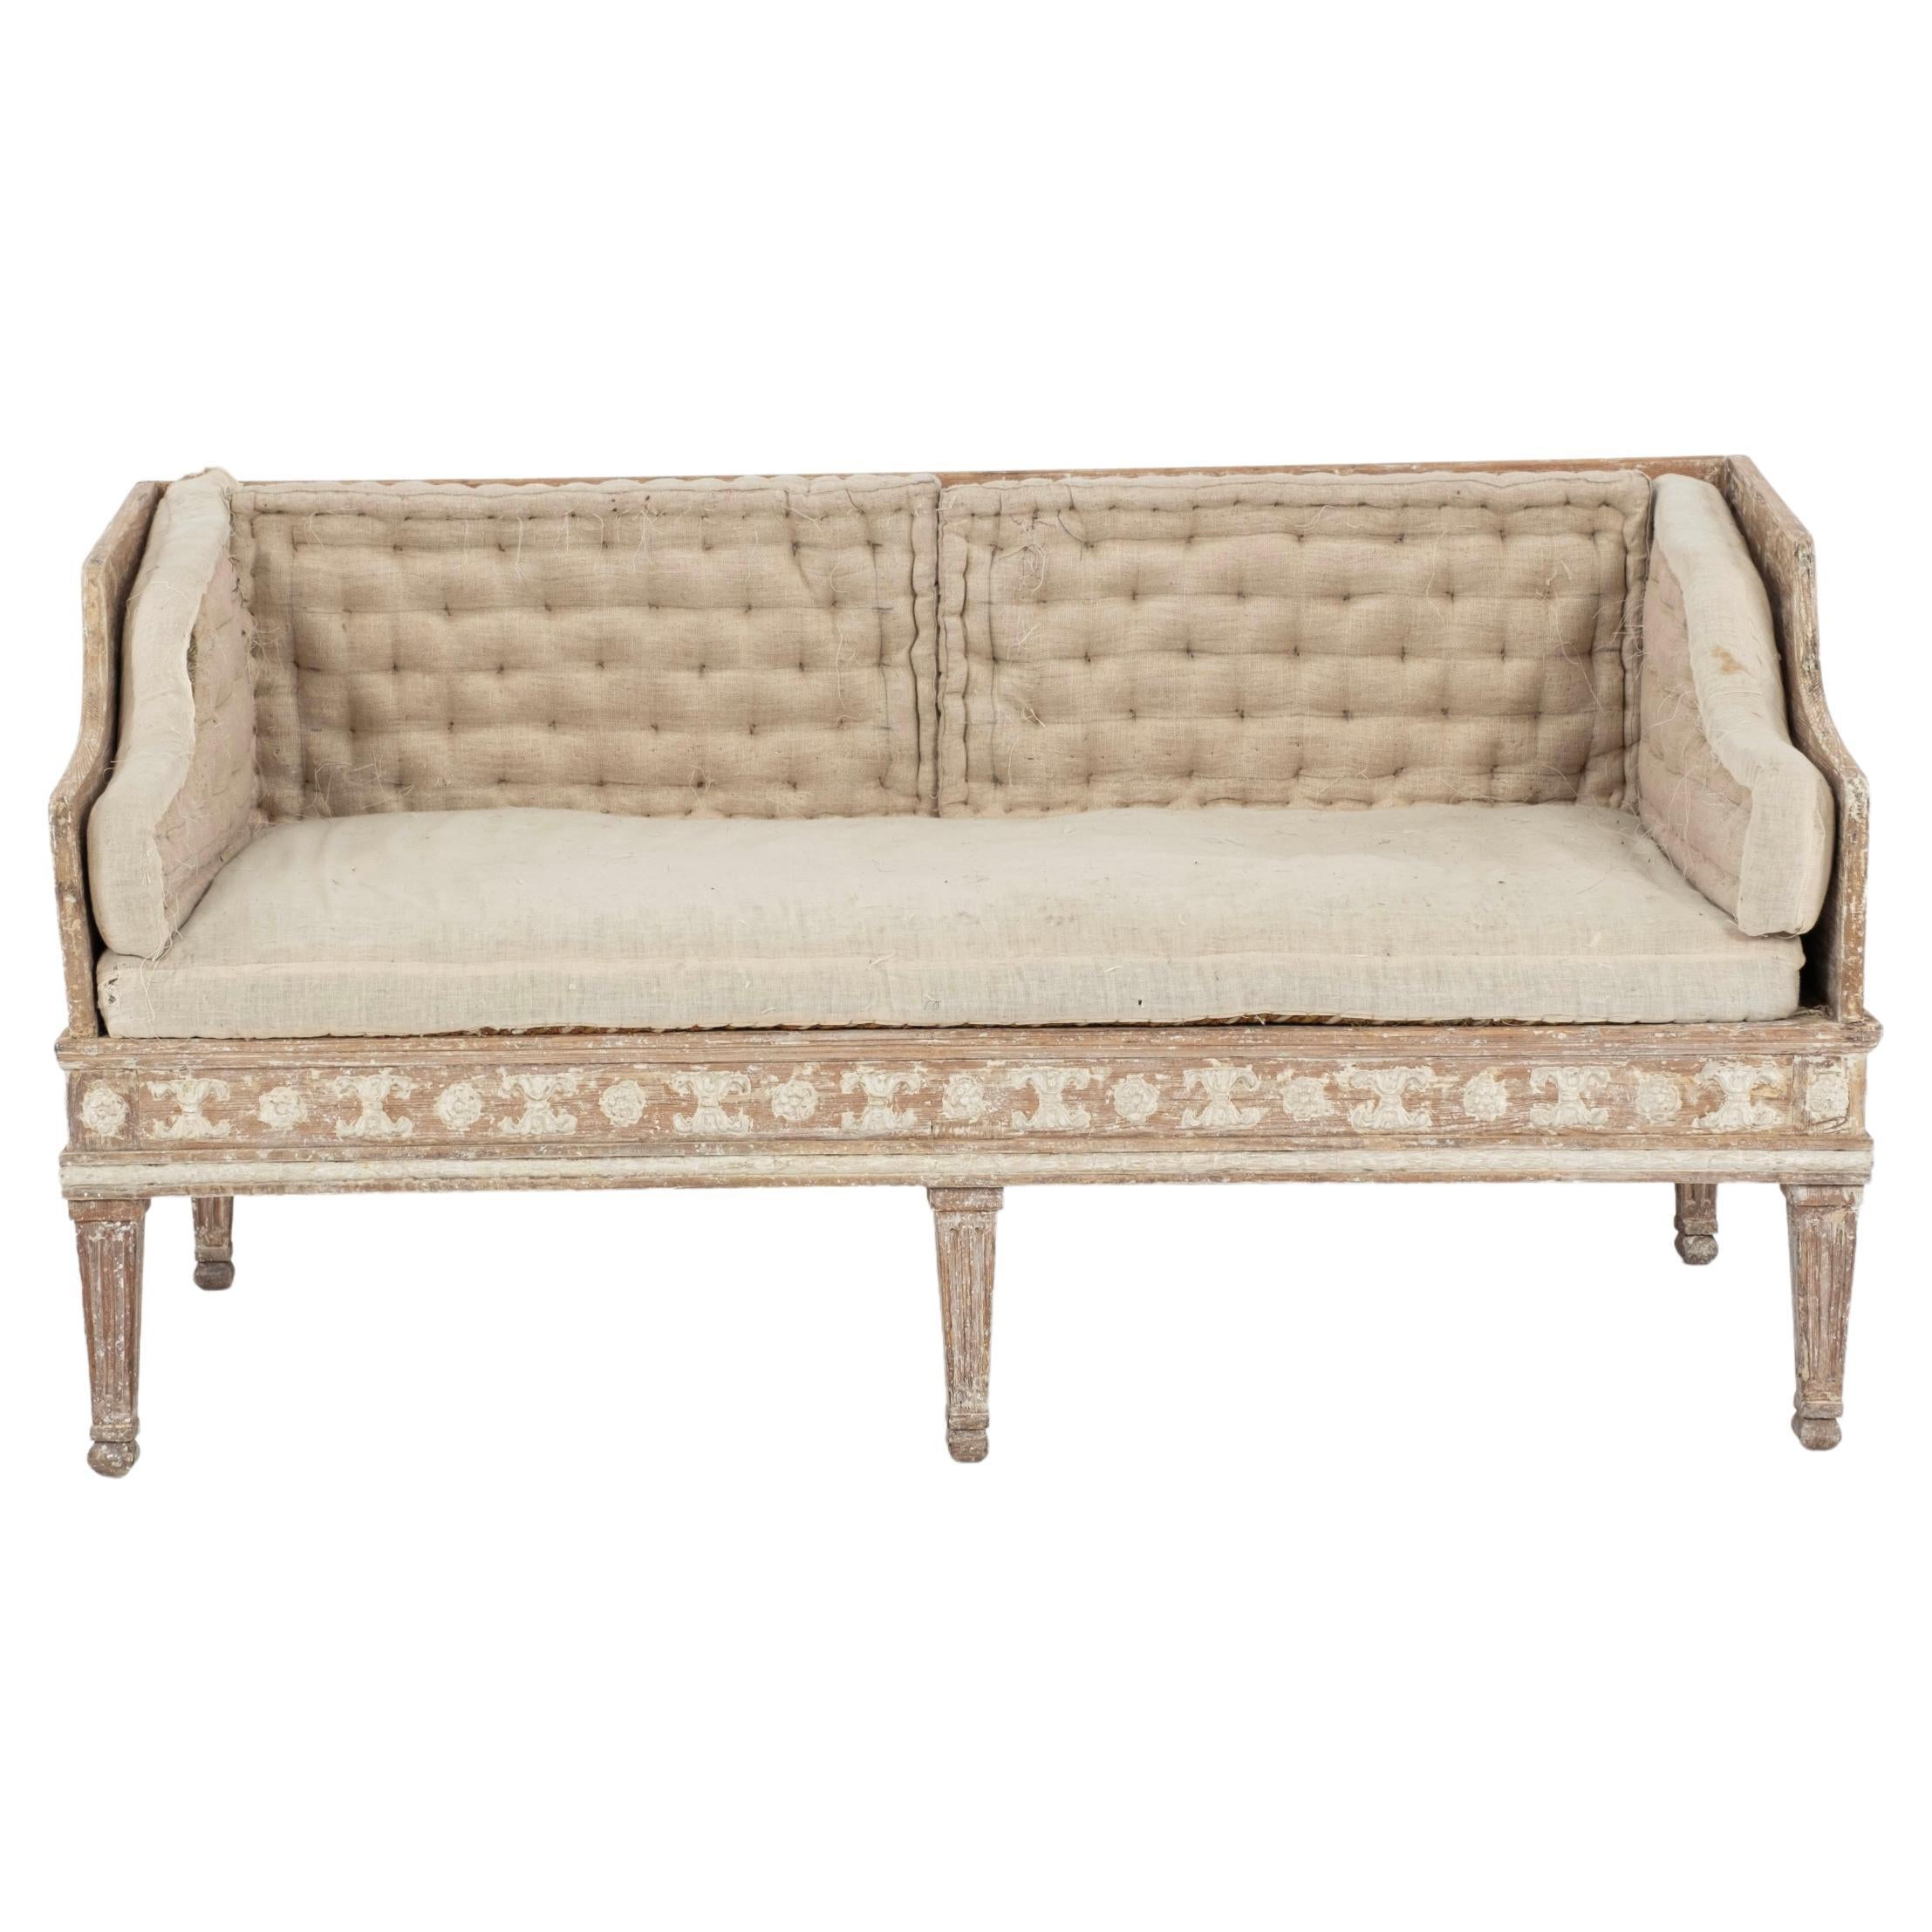 19th C. Gustavian Bench or Sofa For Sale